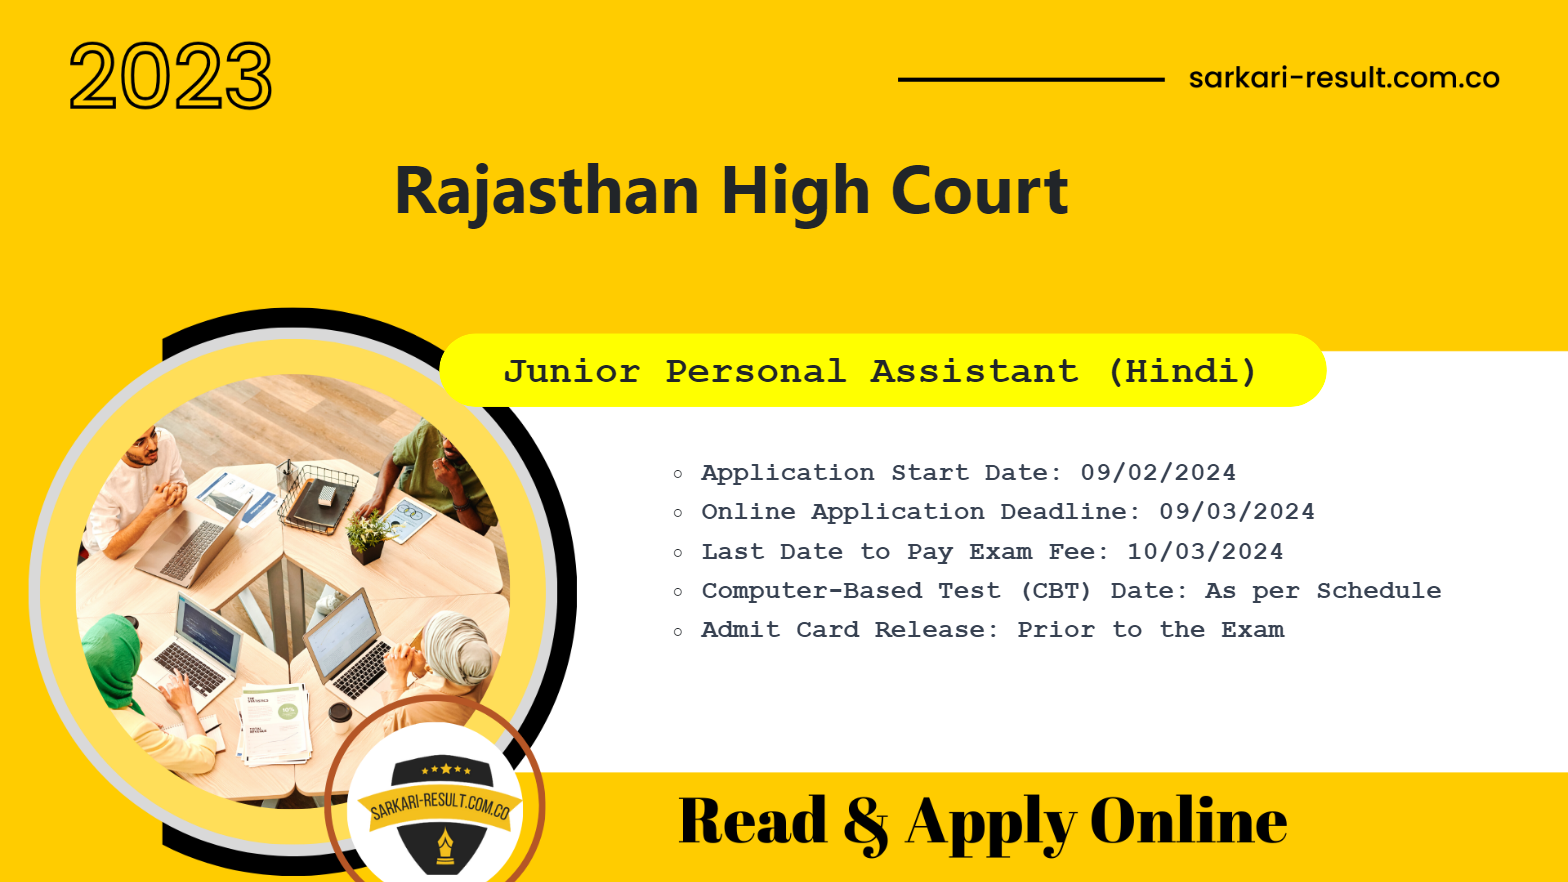 Online Application for 30 Junior Personal Assistant (Hindi) Positions at Rajasthan High Court RHC - 2024 Recruitment